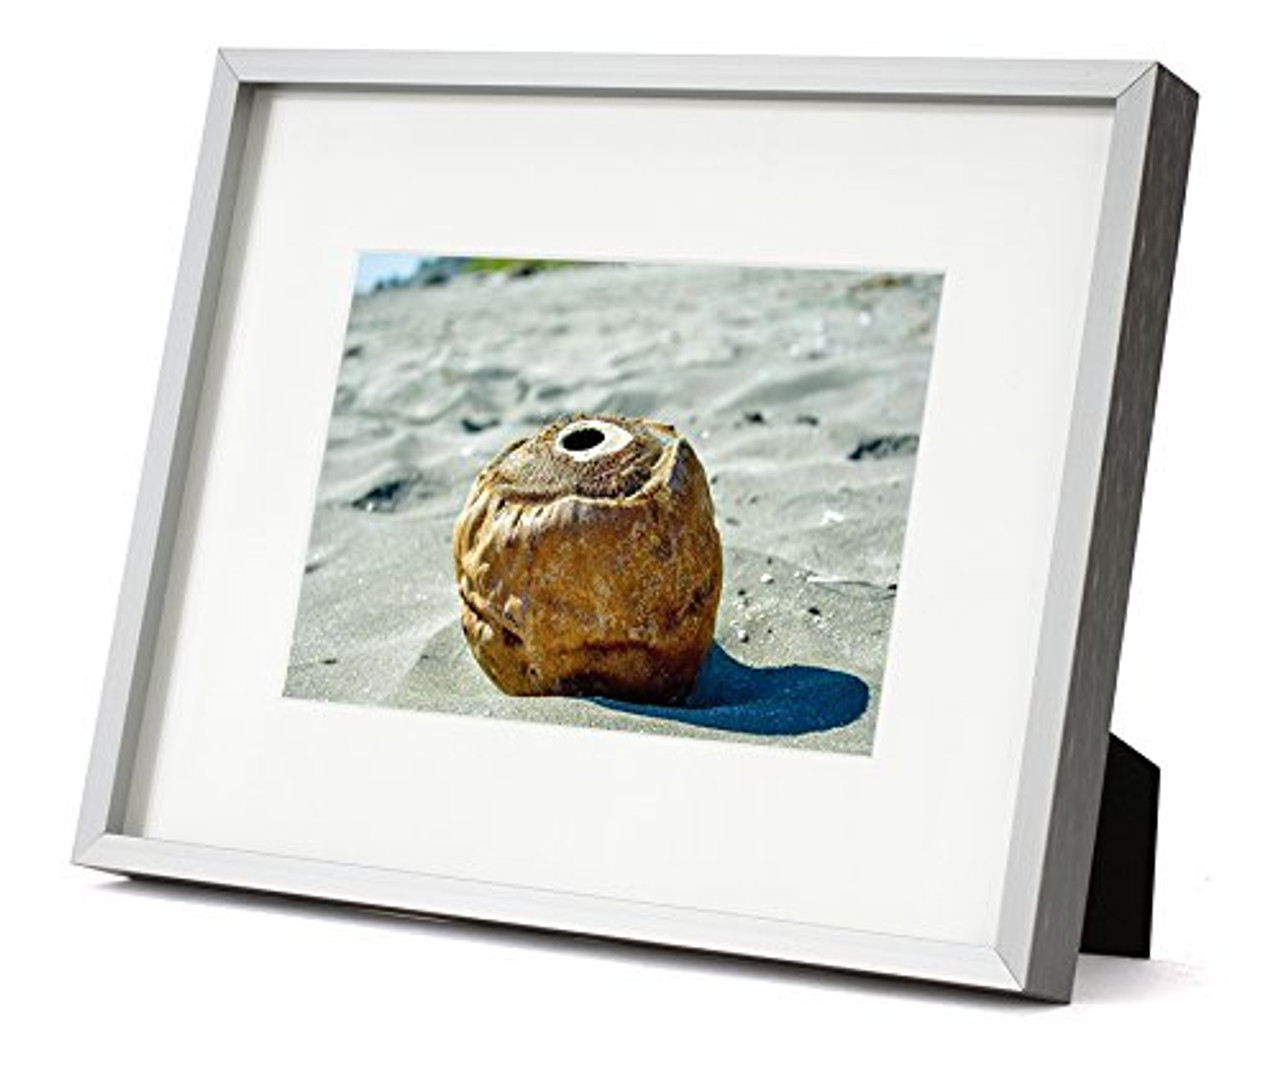 8x10 Frame With Mat 5x7 Photo 8 x 10 Picture Frame Matted — Modern